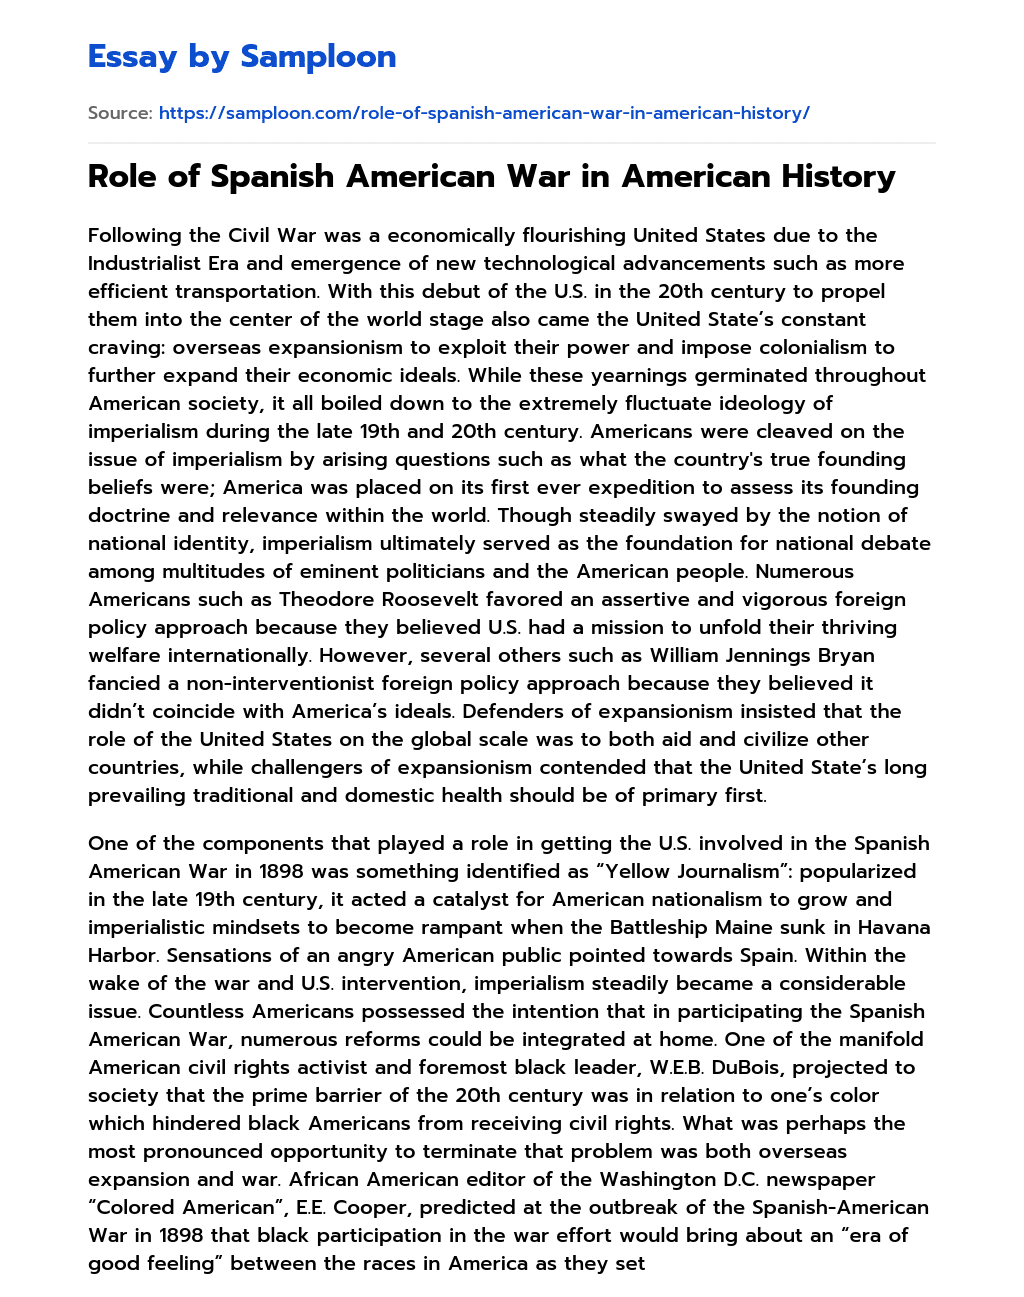 Role of Spanish American War in American History essay